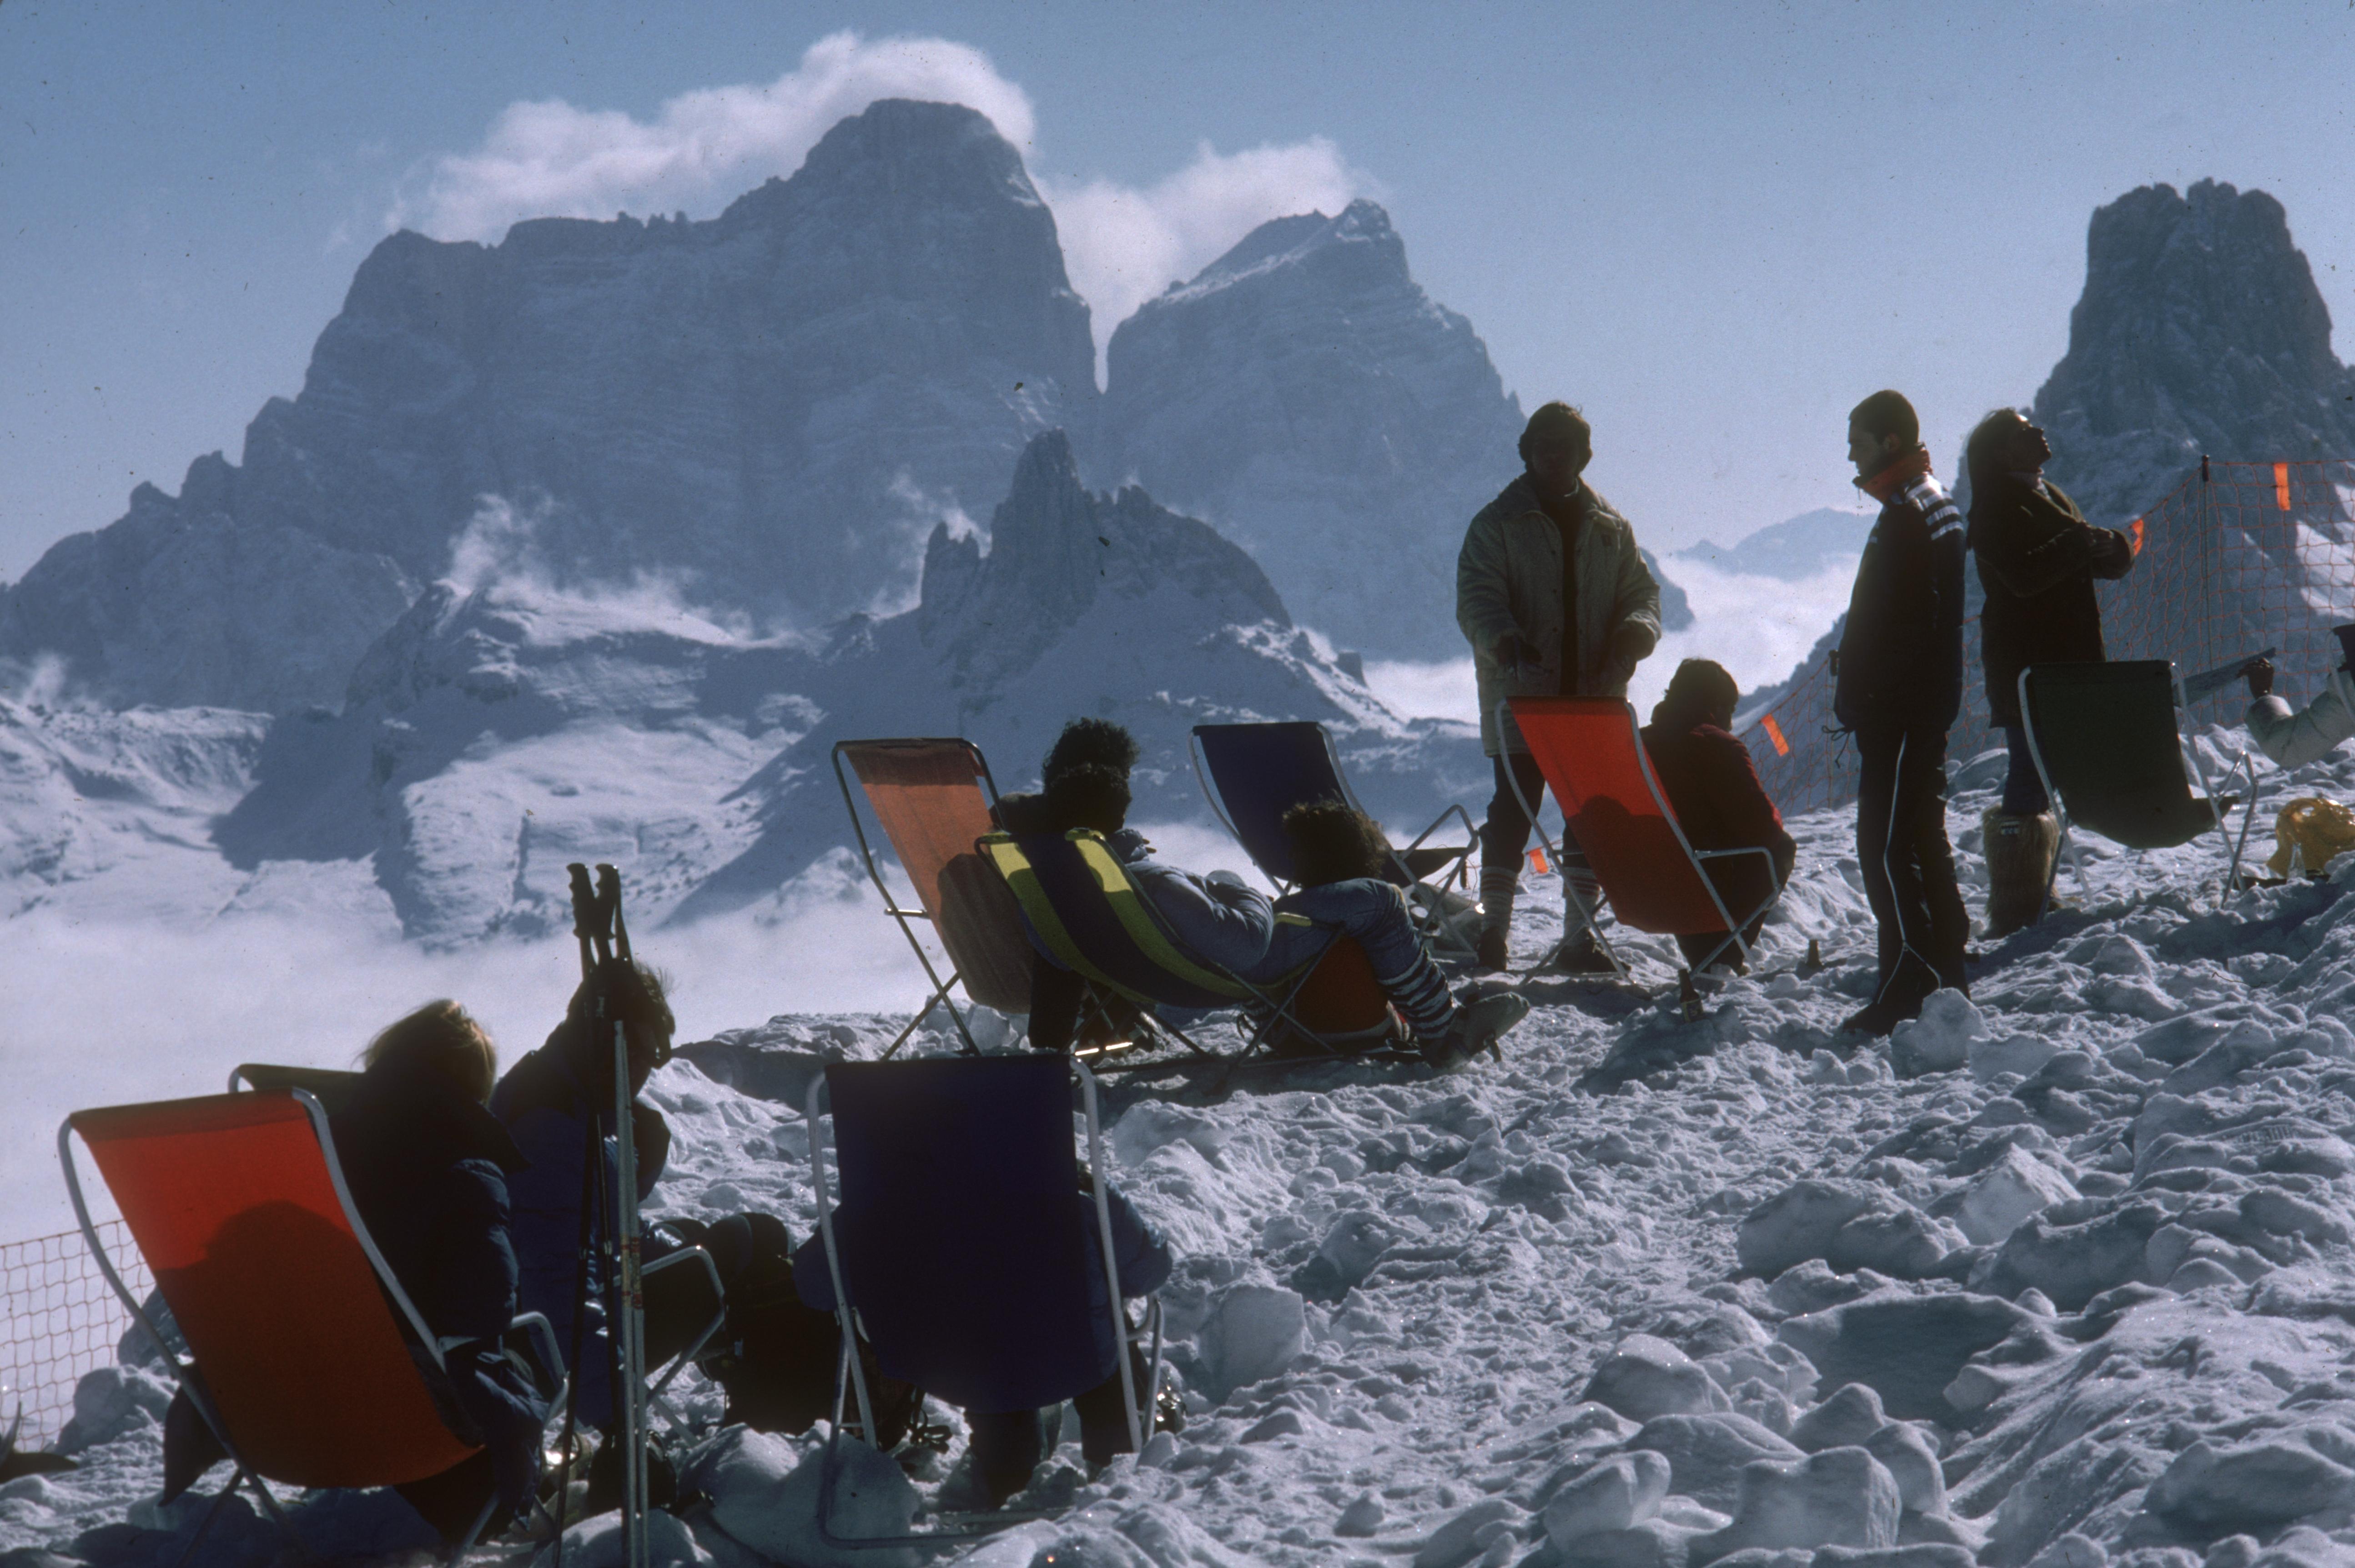 'Cortina d'Ampezzo' 1982 Slim Aarons Limited Estate Edition Print 

A rest from skiing at Cortina d'Ampezzo, March 1982. 

Produced from the original transparency
Certificate of authenticity supplied 
Archive stamped

Paper Size  24x20 inches / 60 x